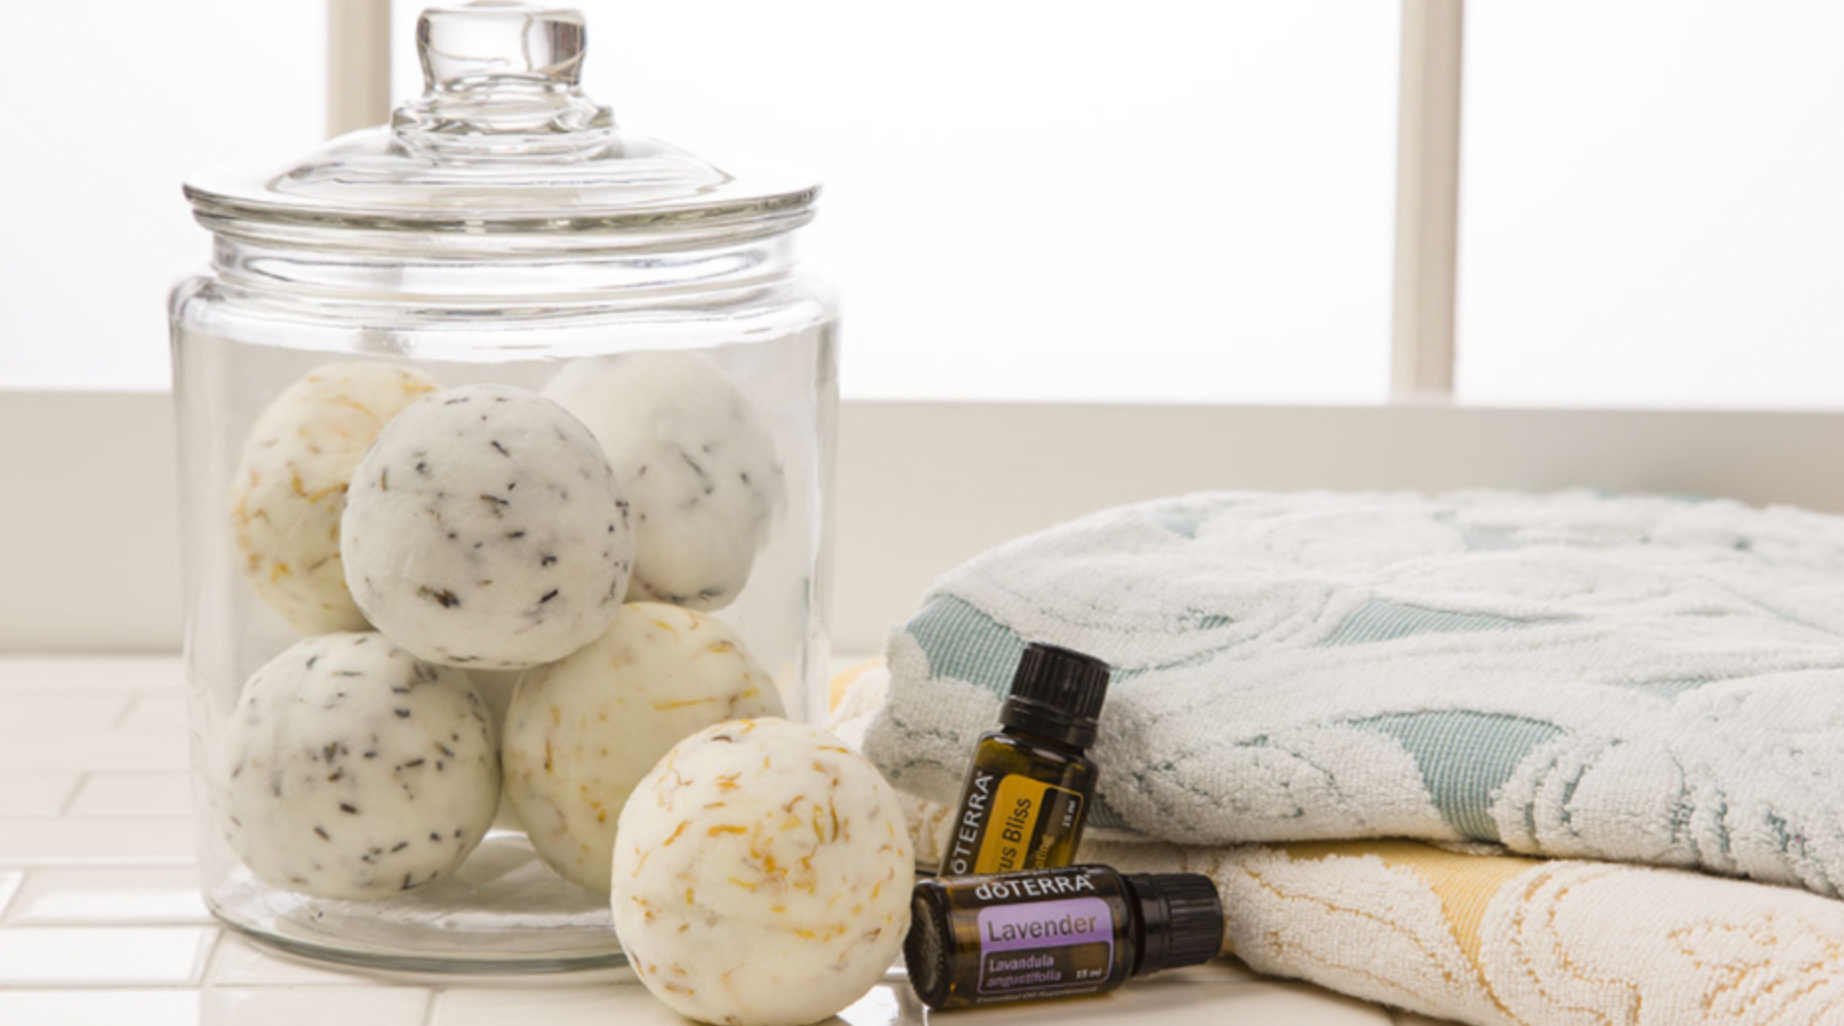 The Art of Properly Storing Your Bath Bombs